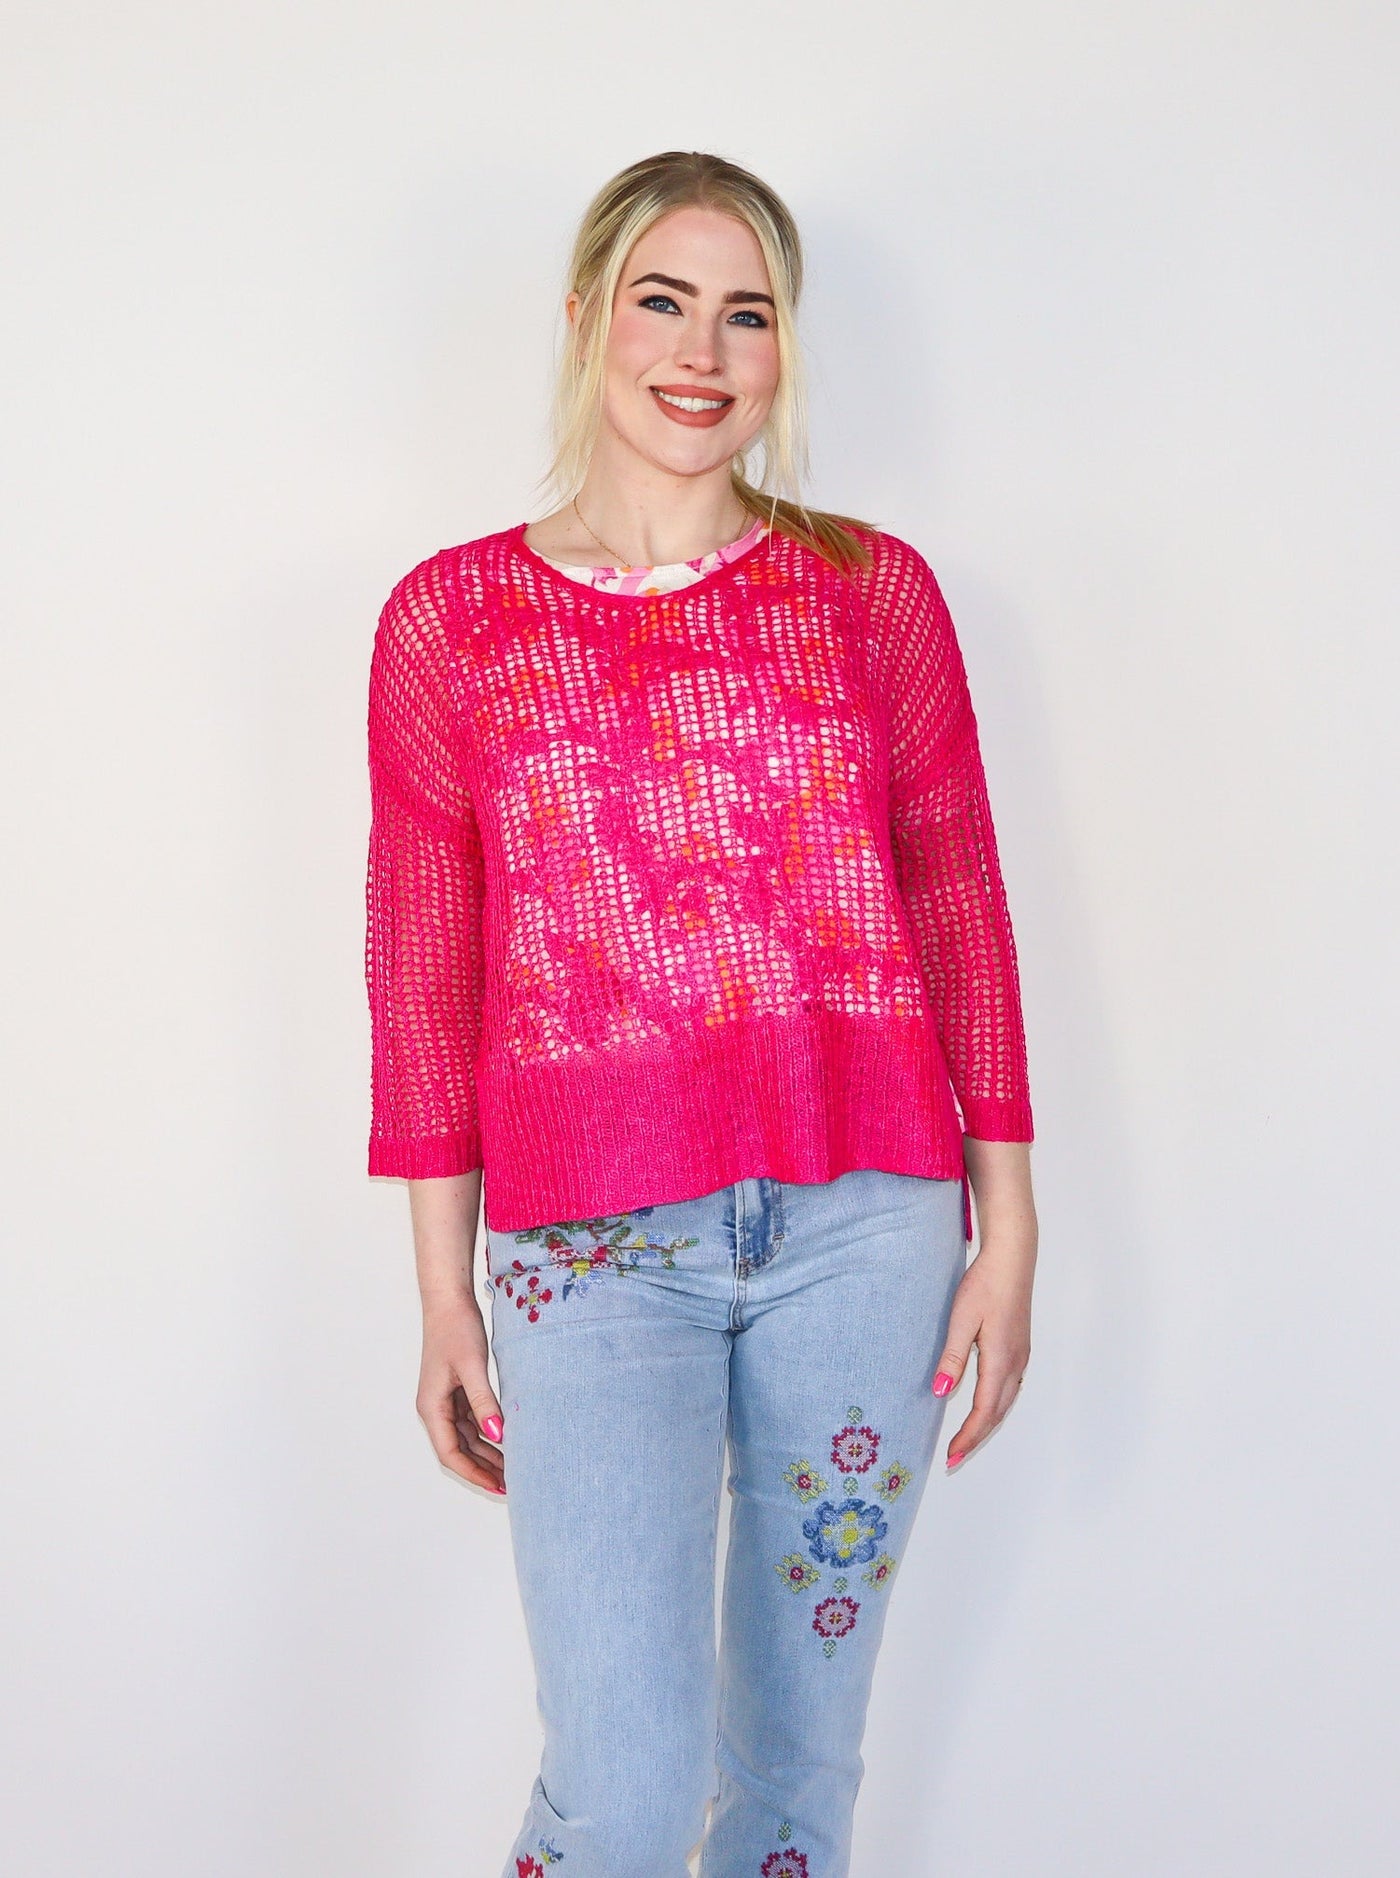 Model is wearing a hot pink fishnet crochet sweater. Sweater is paired with a floral tank top underneath and blue jeans. 